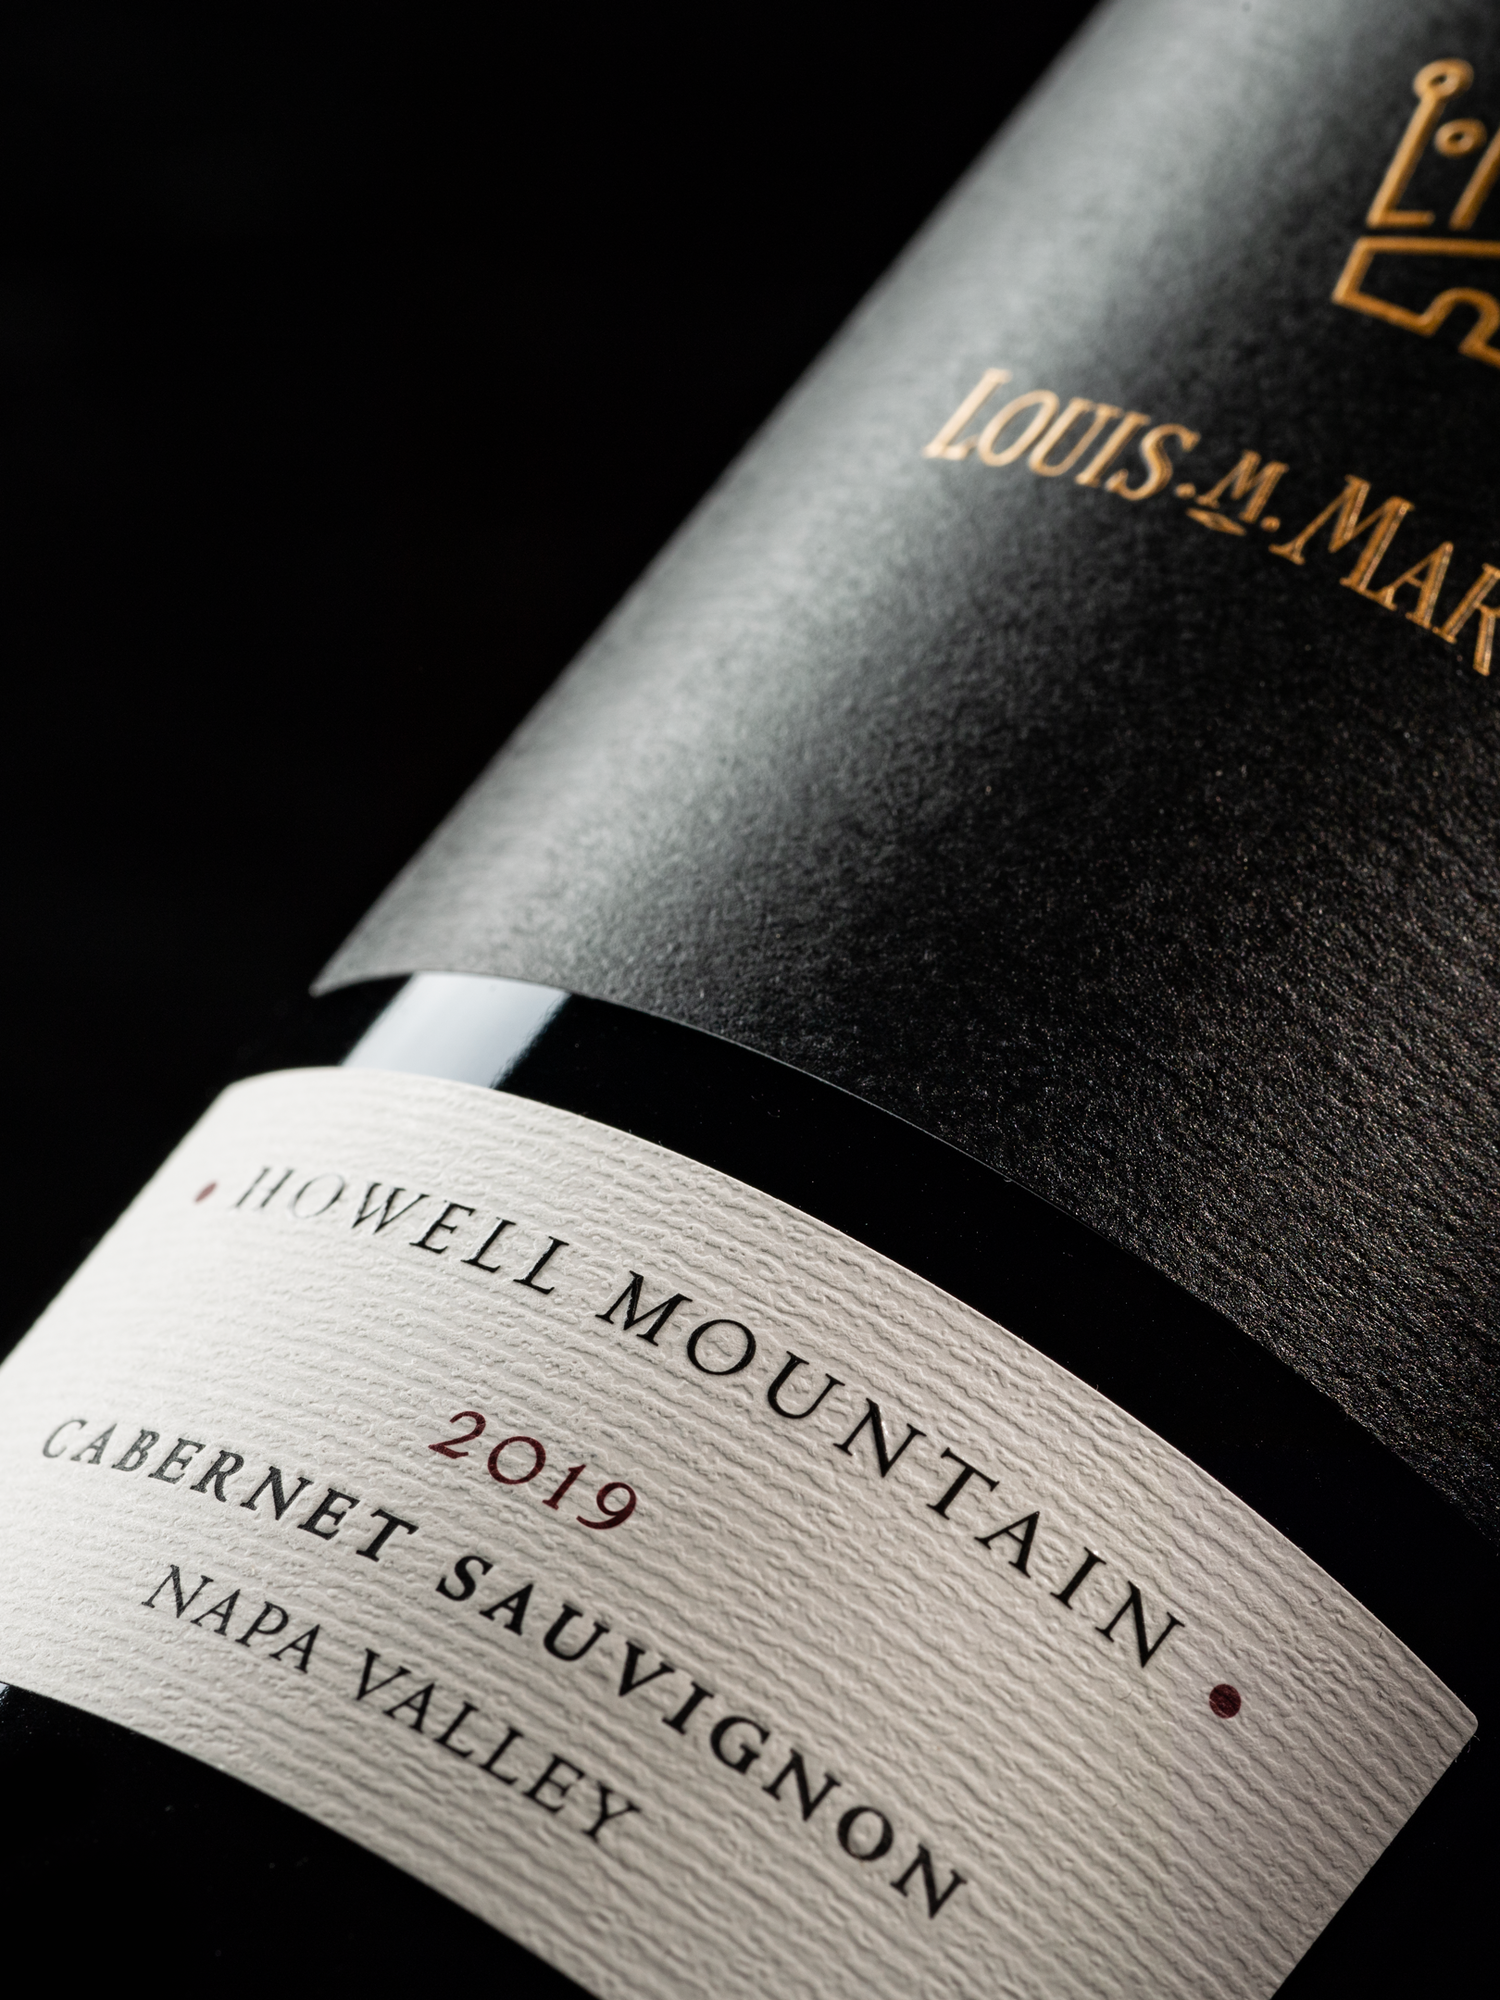 Howell Mountain Cab Sauv wine bottle.